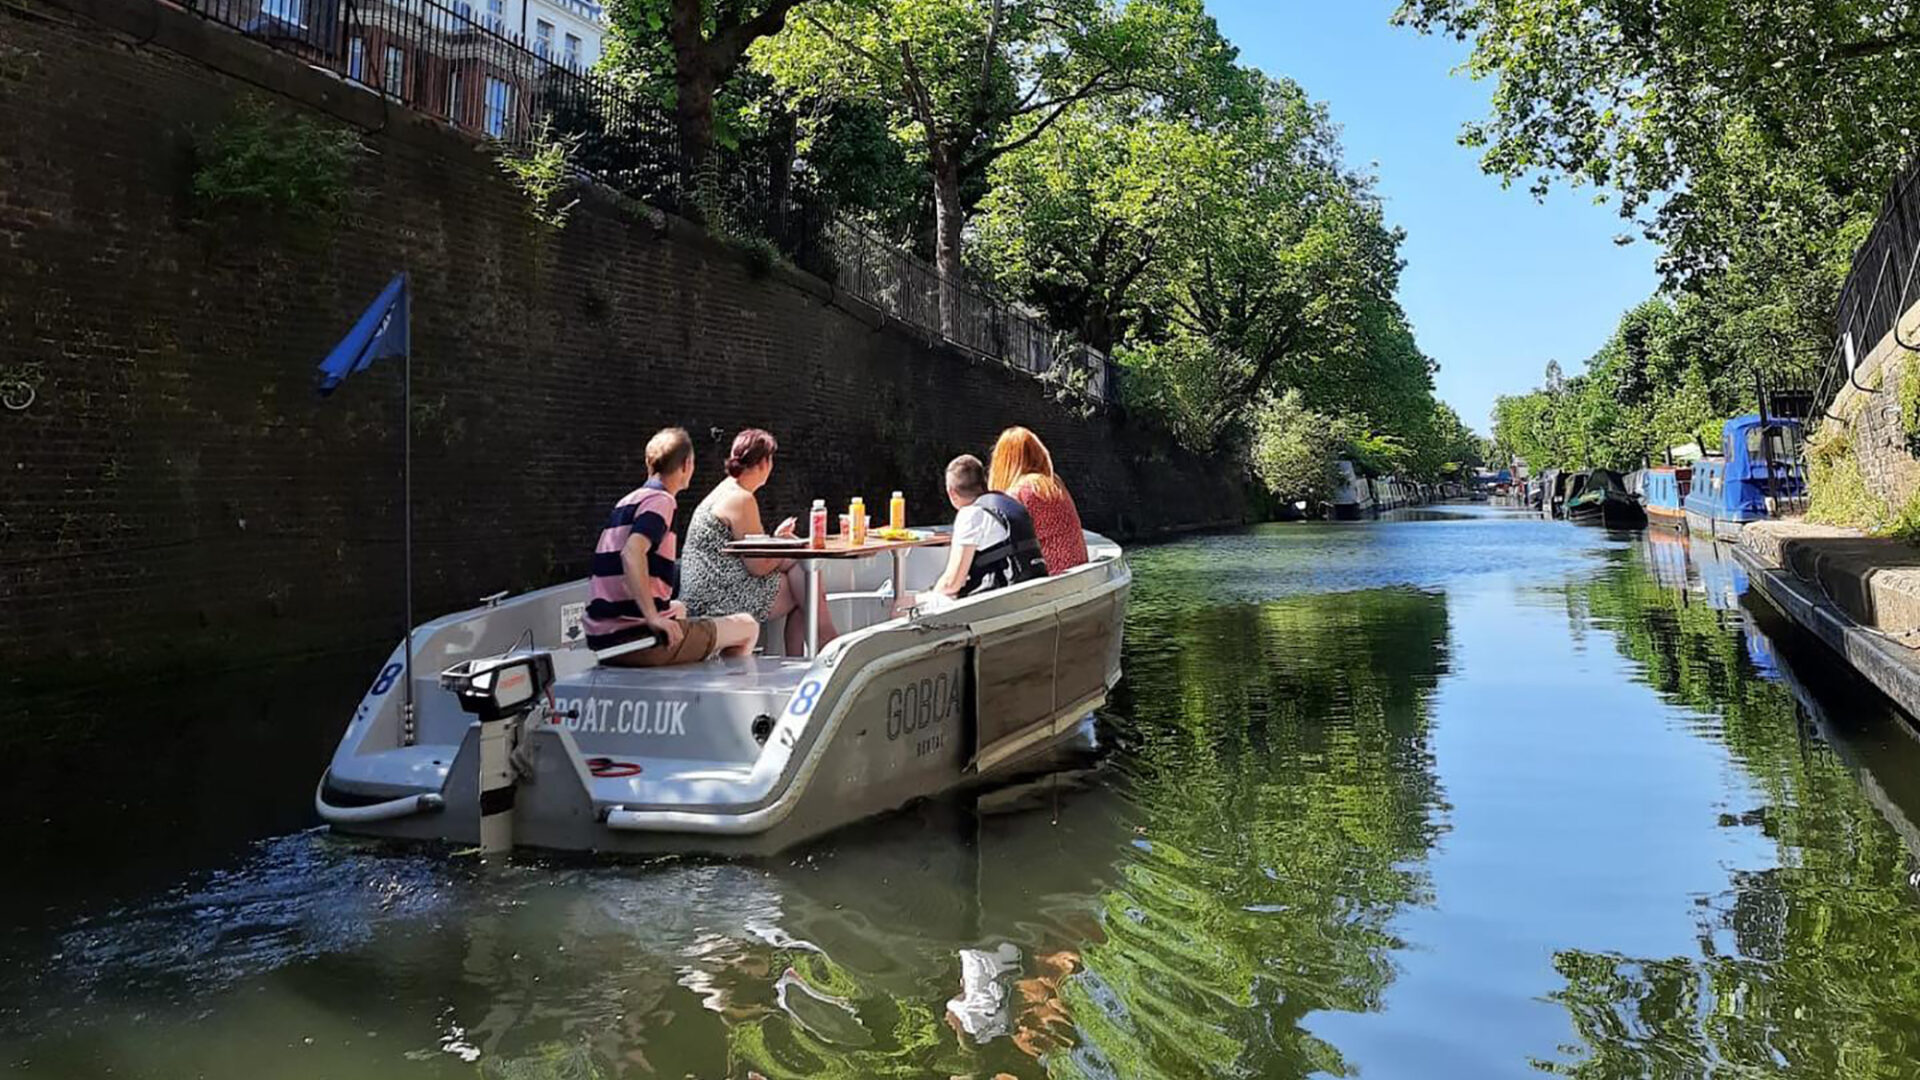 GoBoat self-drive electric boats for hire from Merchant Square